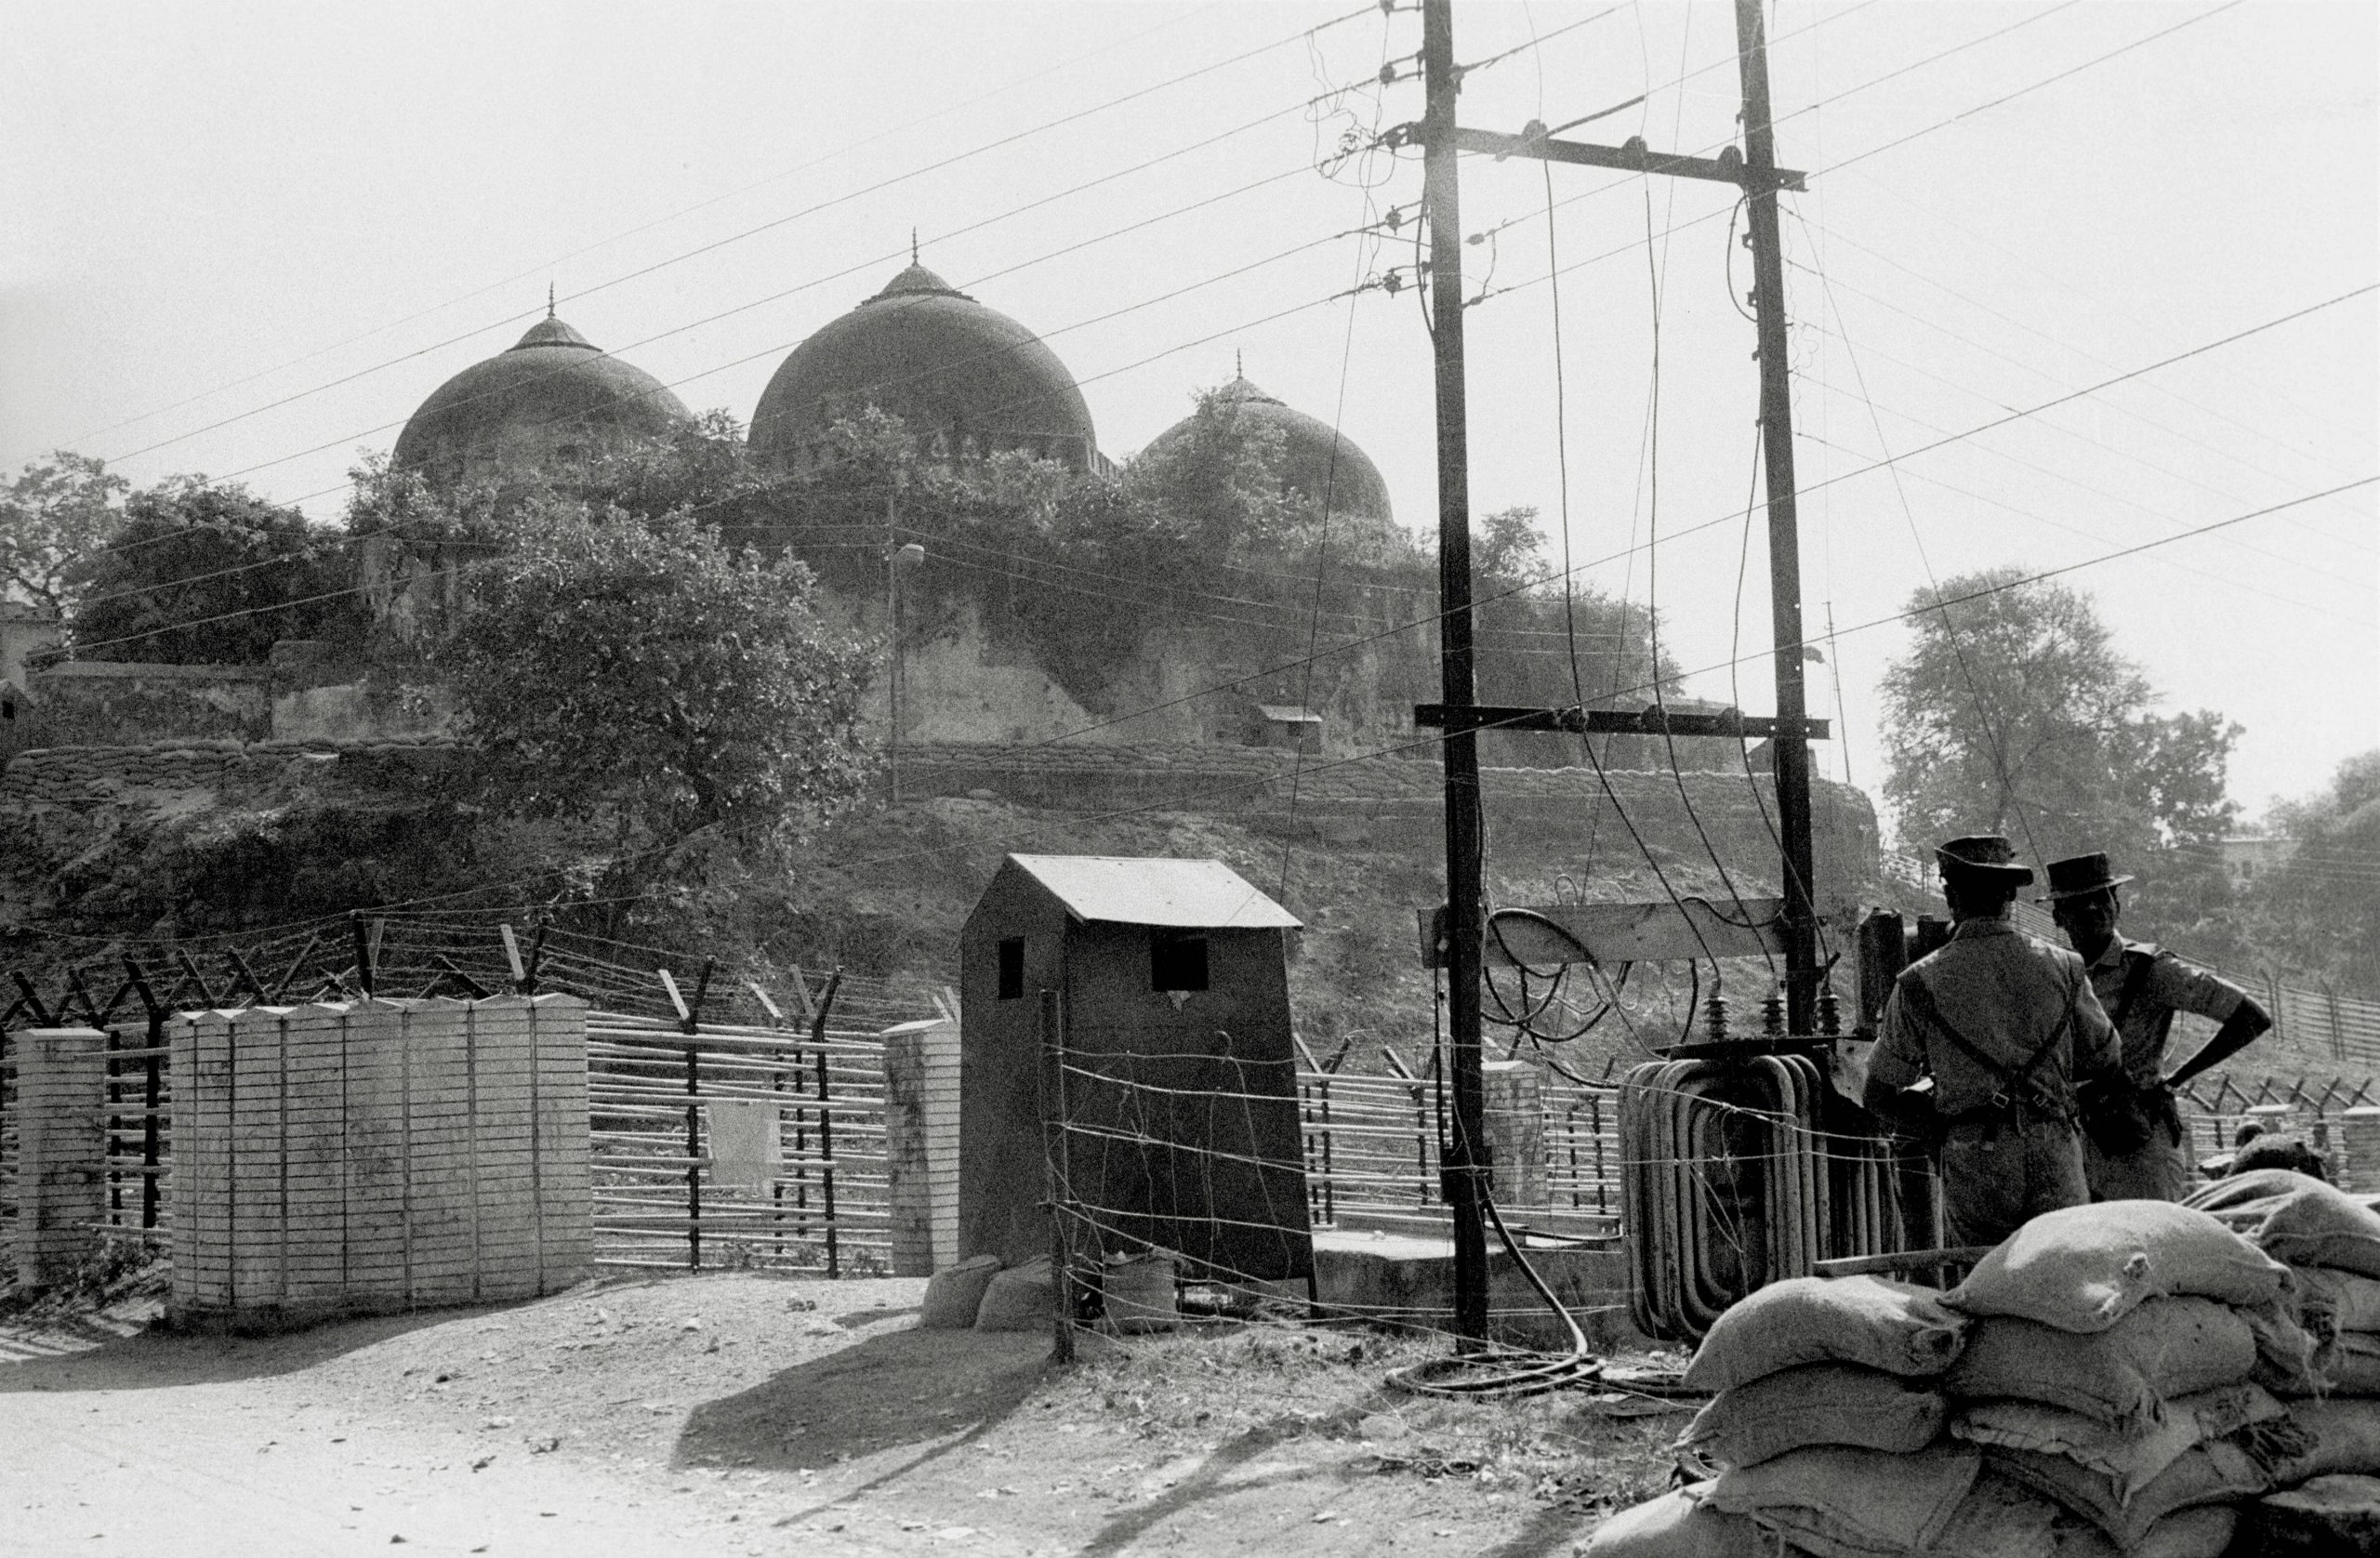 CBI to decide on challenging special court verdict on Babri Masjid: Agency counsel